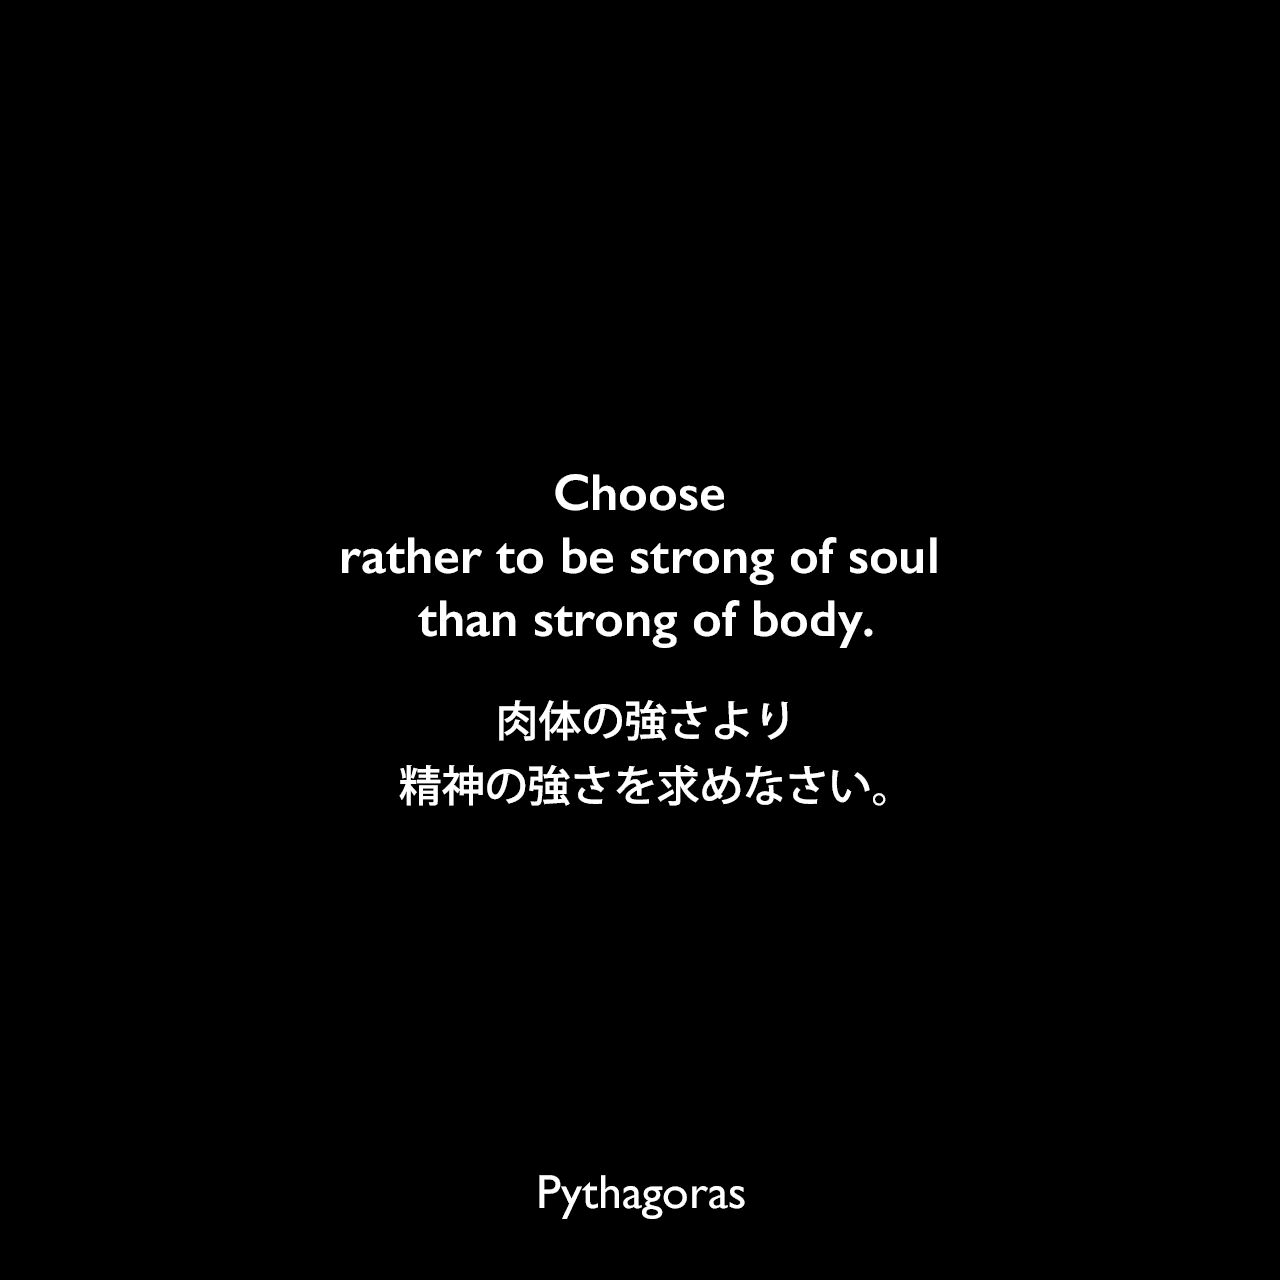 Choose rather to be strong of soul than strong of body.肉体の強さより精神の強さを求めなさい。Pythagoras